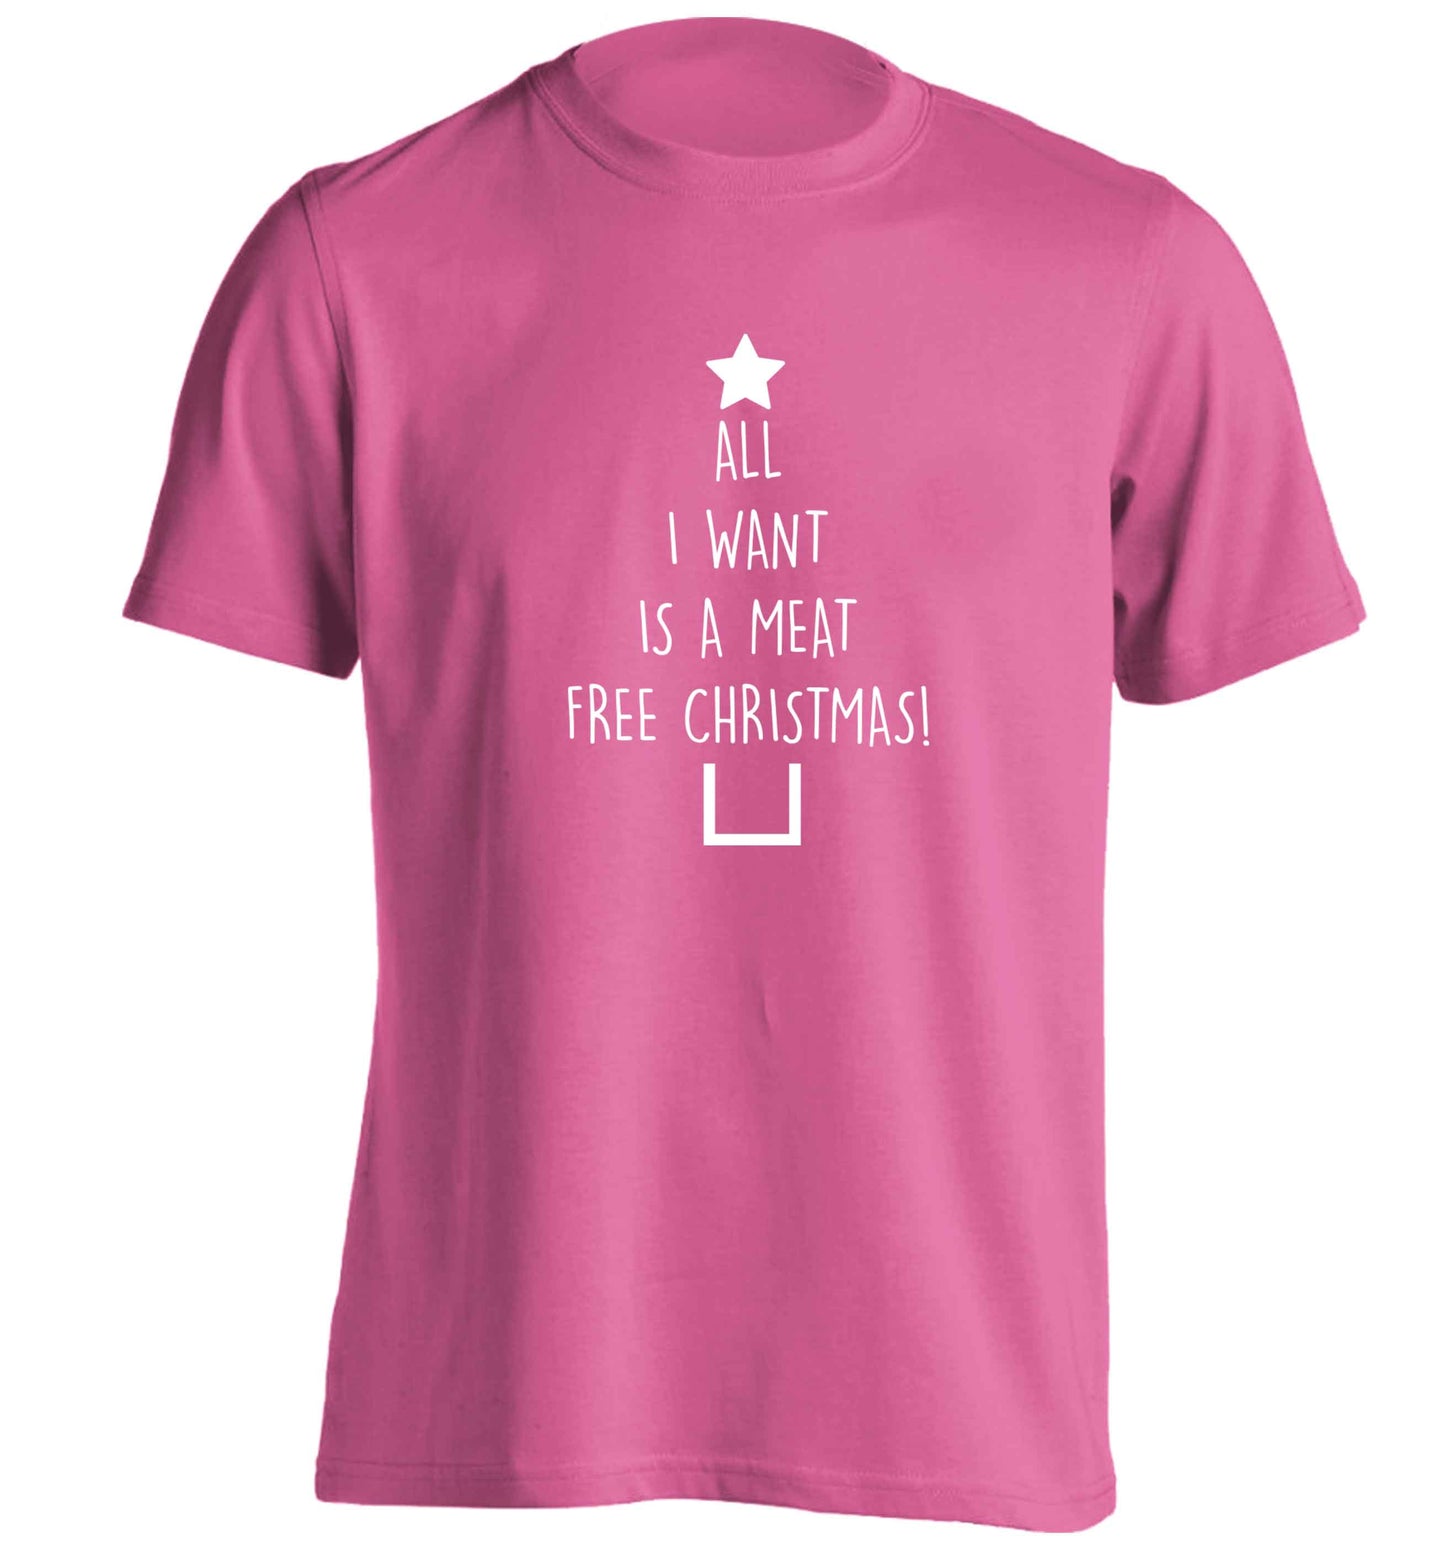 All I want is a meat free Christmas adults unisex pink Tshirt 2XL